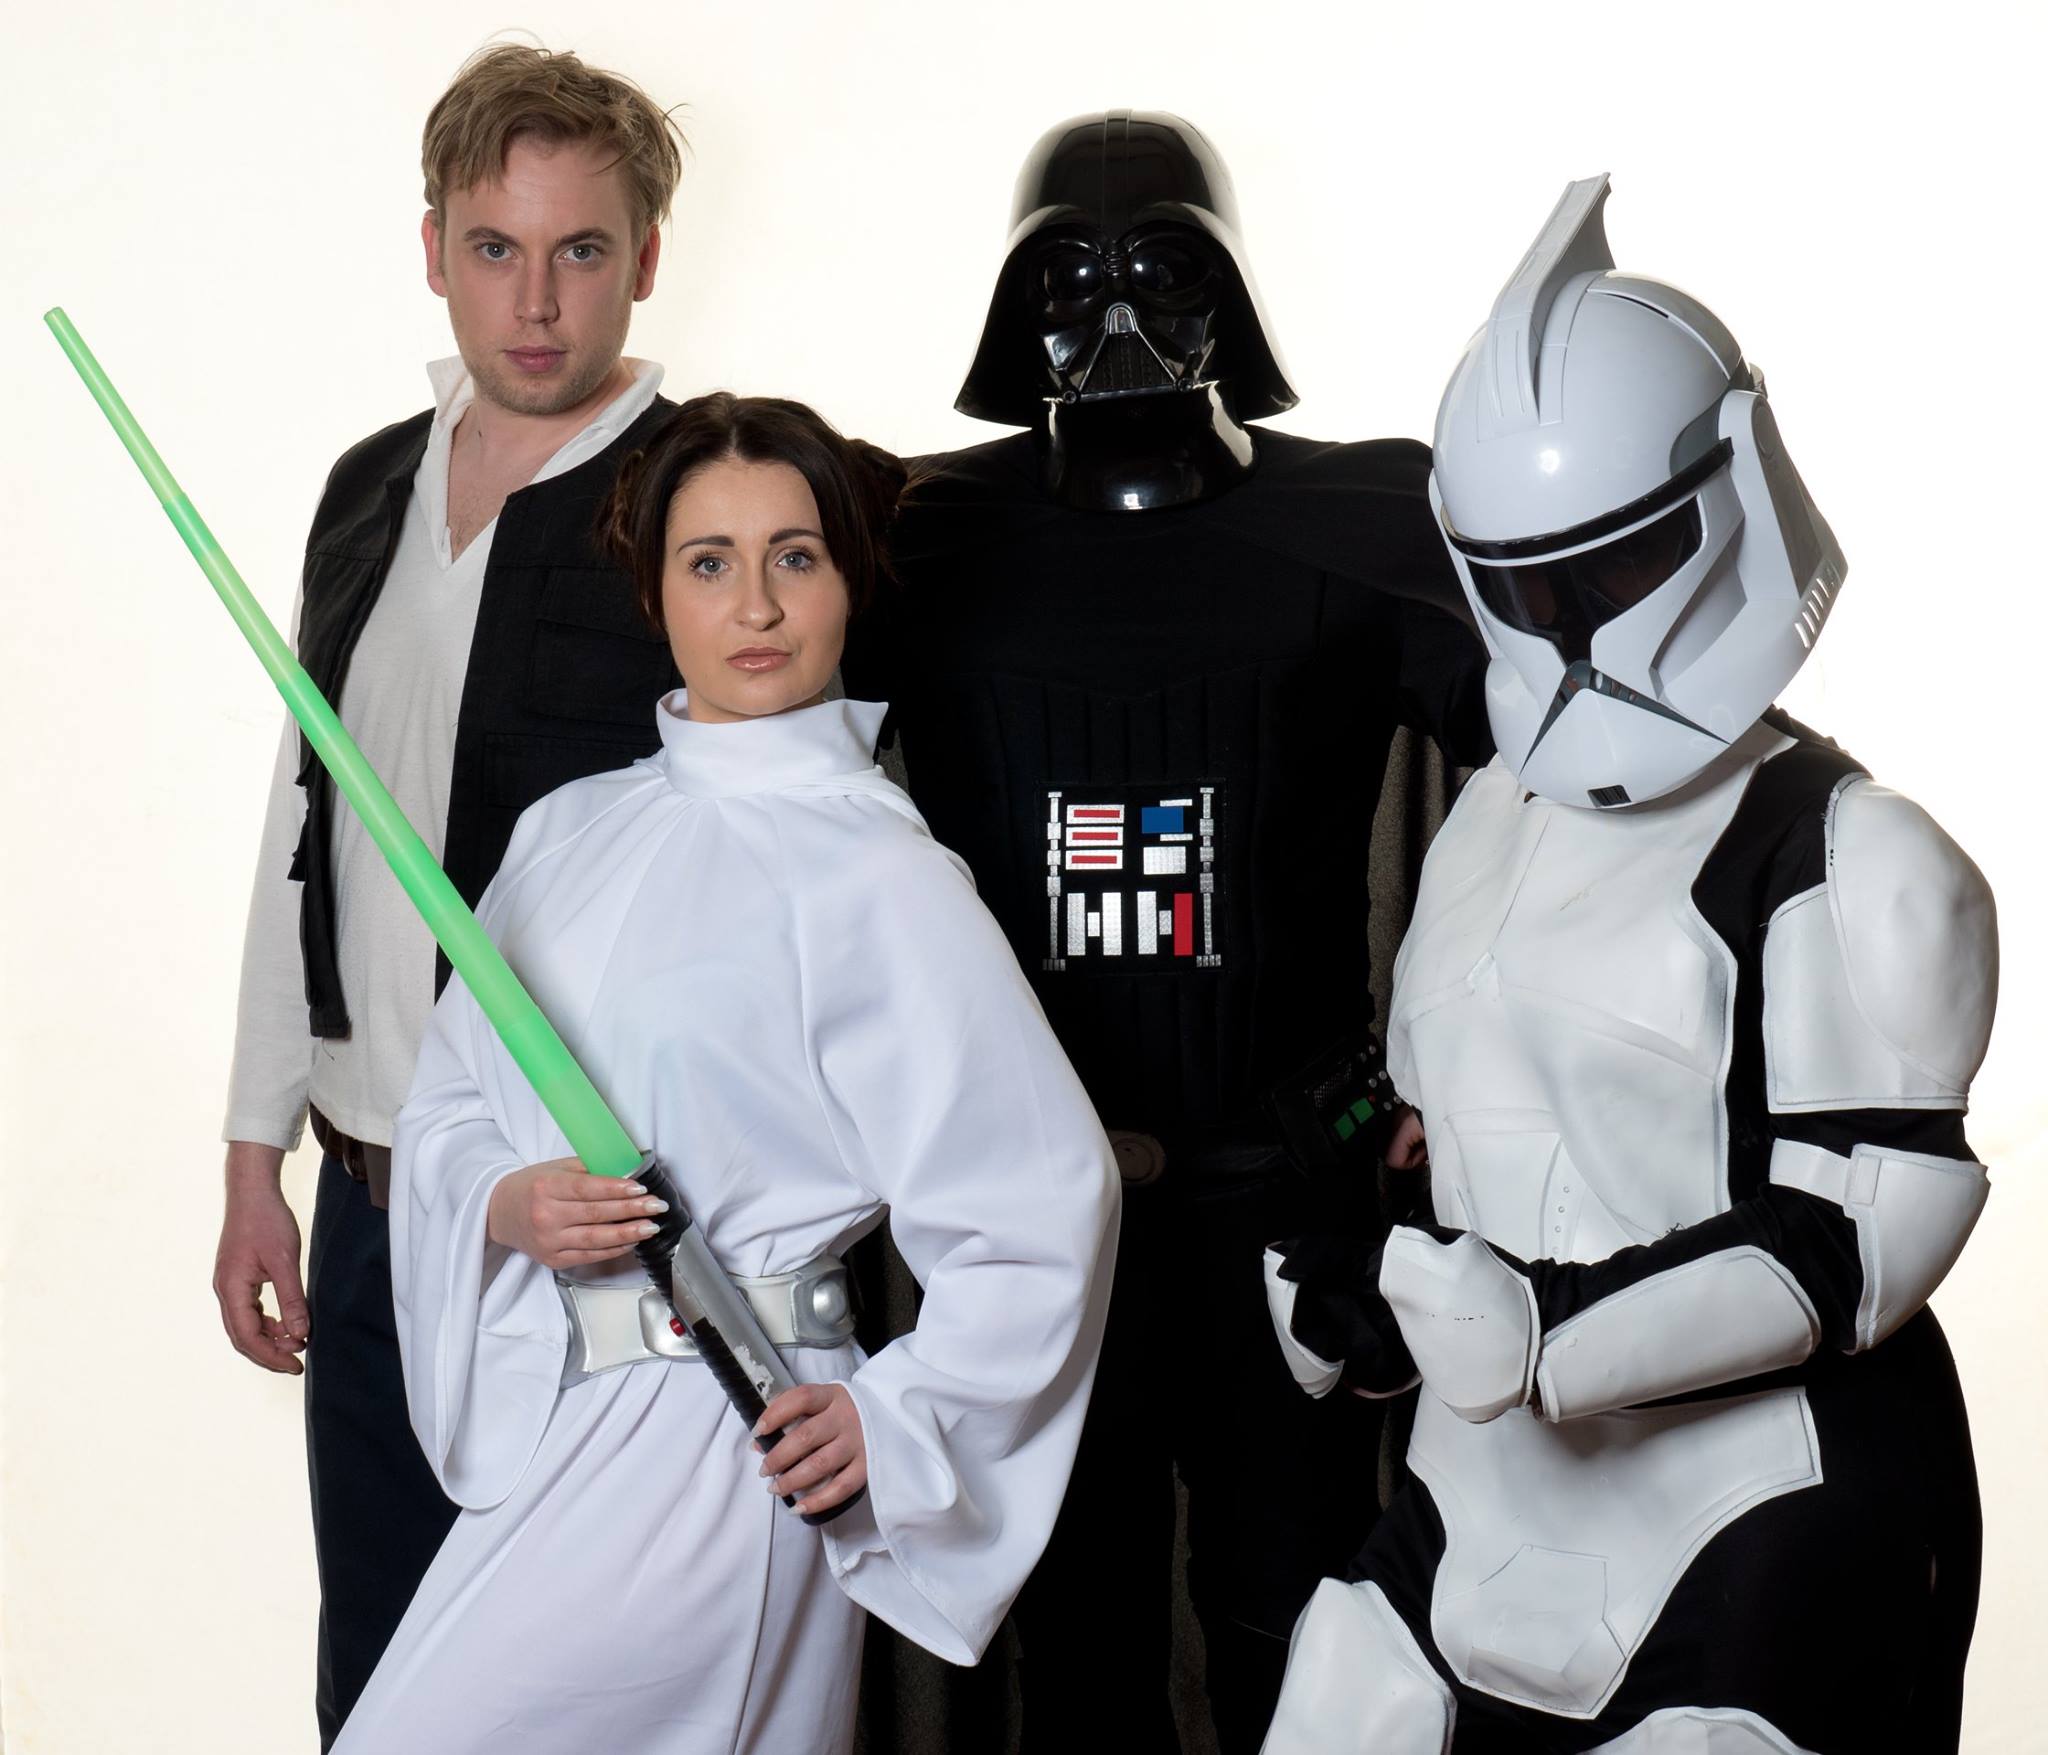 Star Wars Costumes for Hire or Buy May 4th